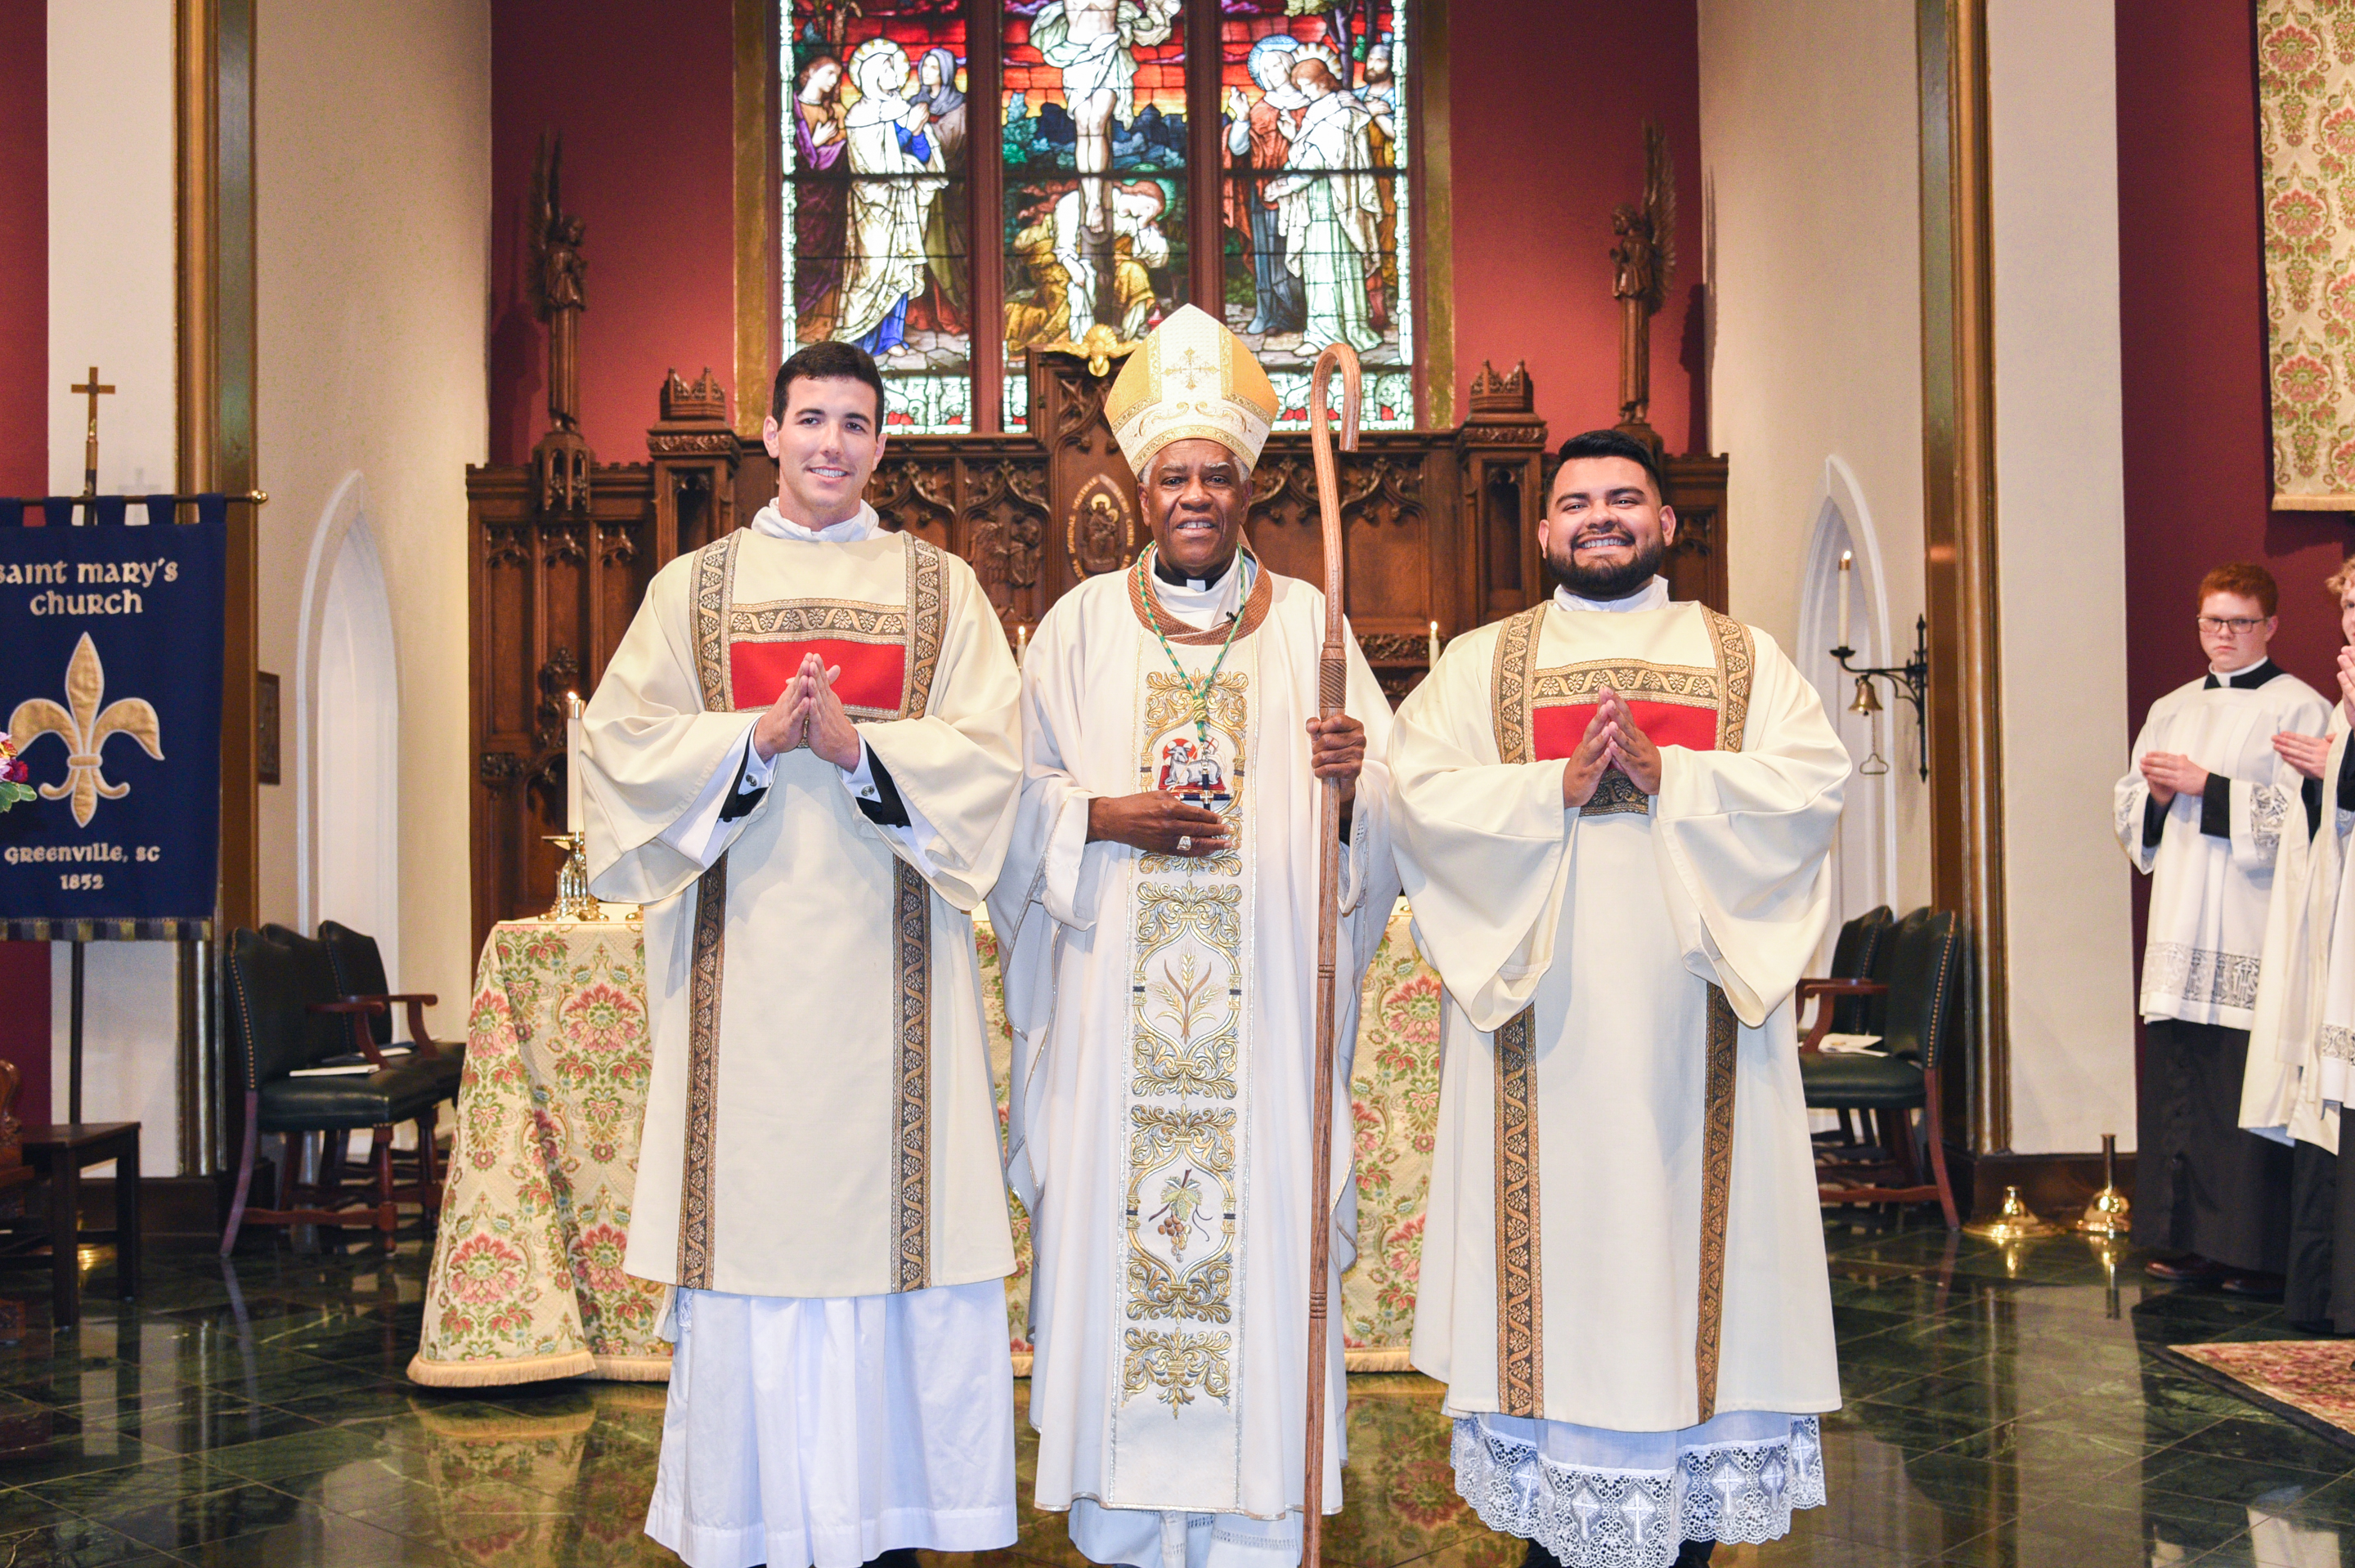 Bishop Fabre-Jeune with Deacons O'Steen and Roman